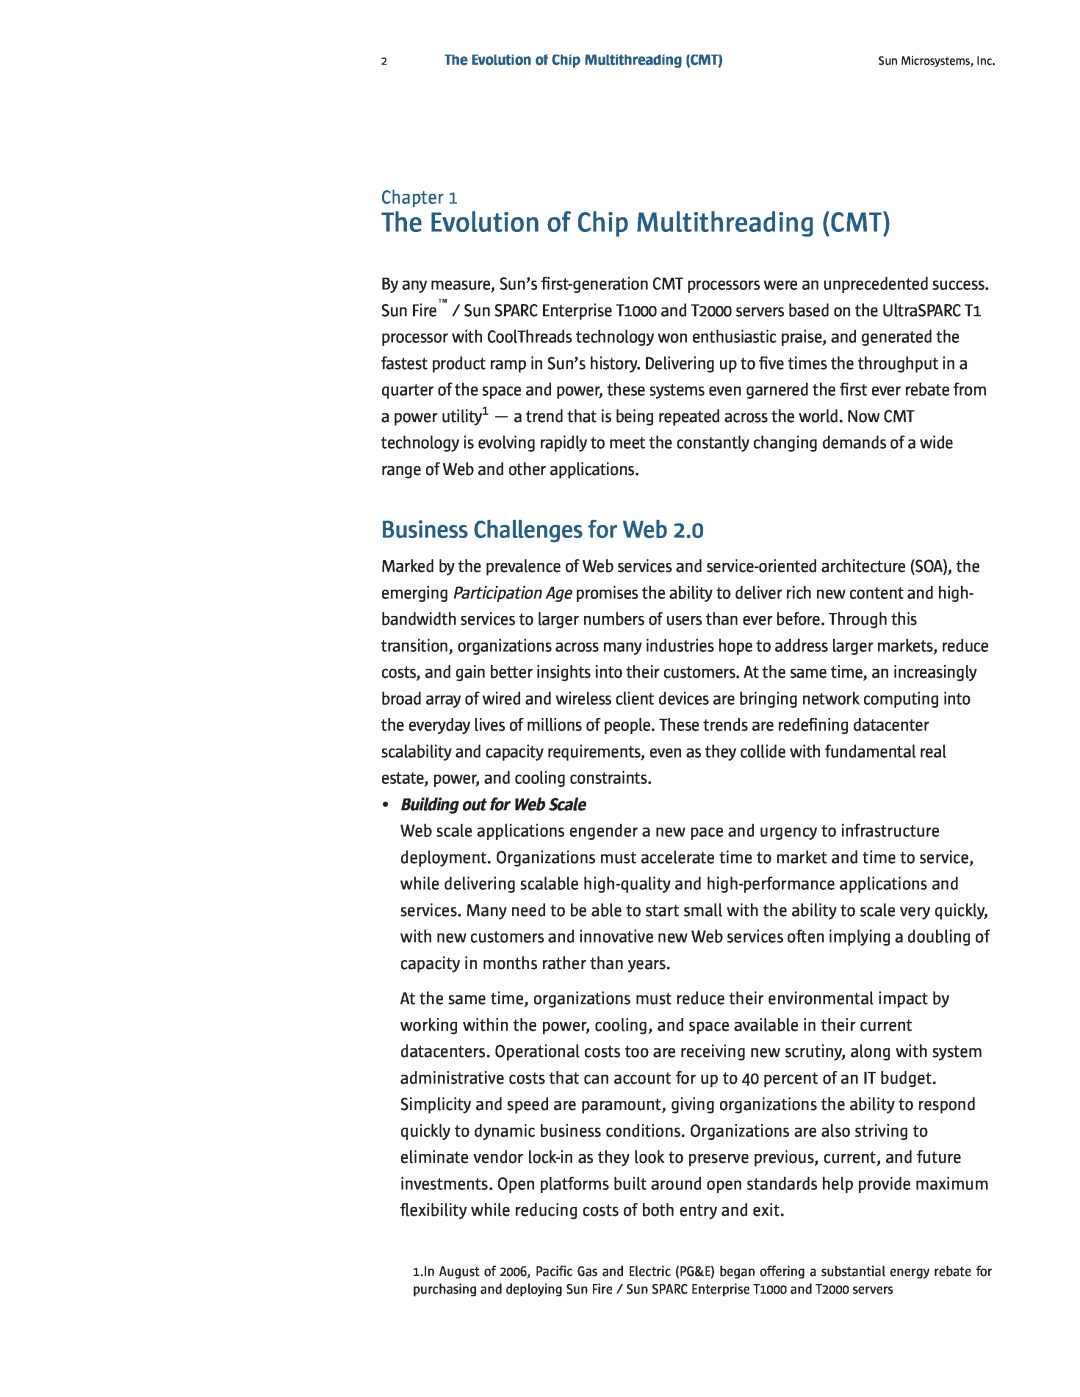 Sun Microsystems T5120, T5220 manual The Evolution of Chip Multithreading CMT, Business Challenges for Web, Chapter 